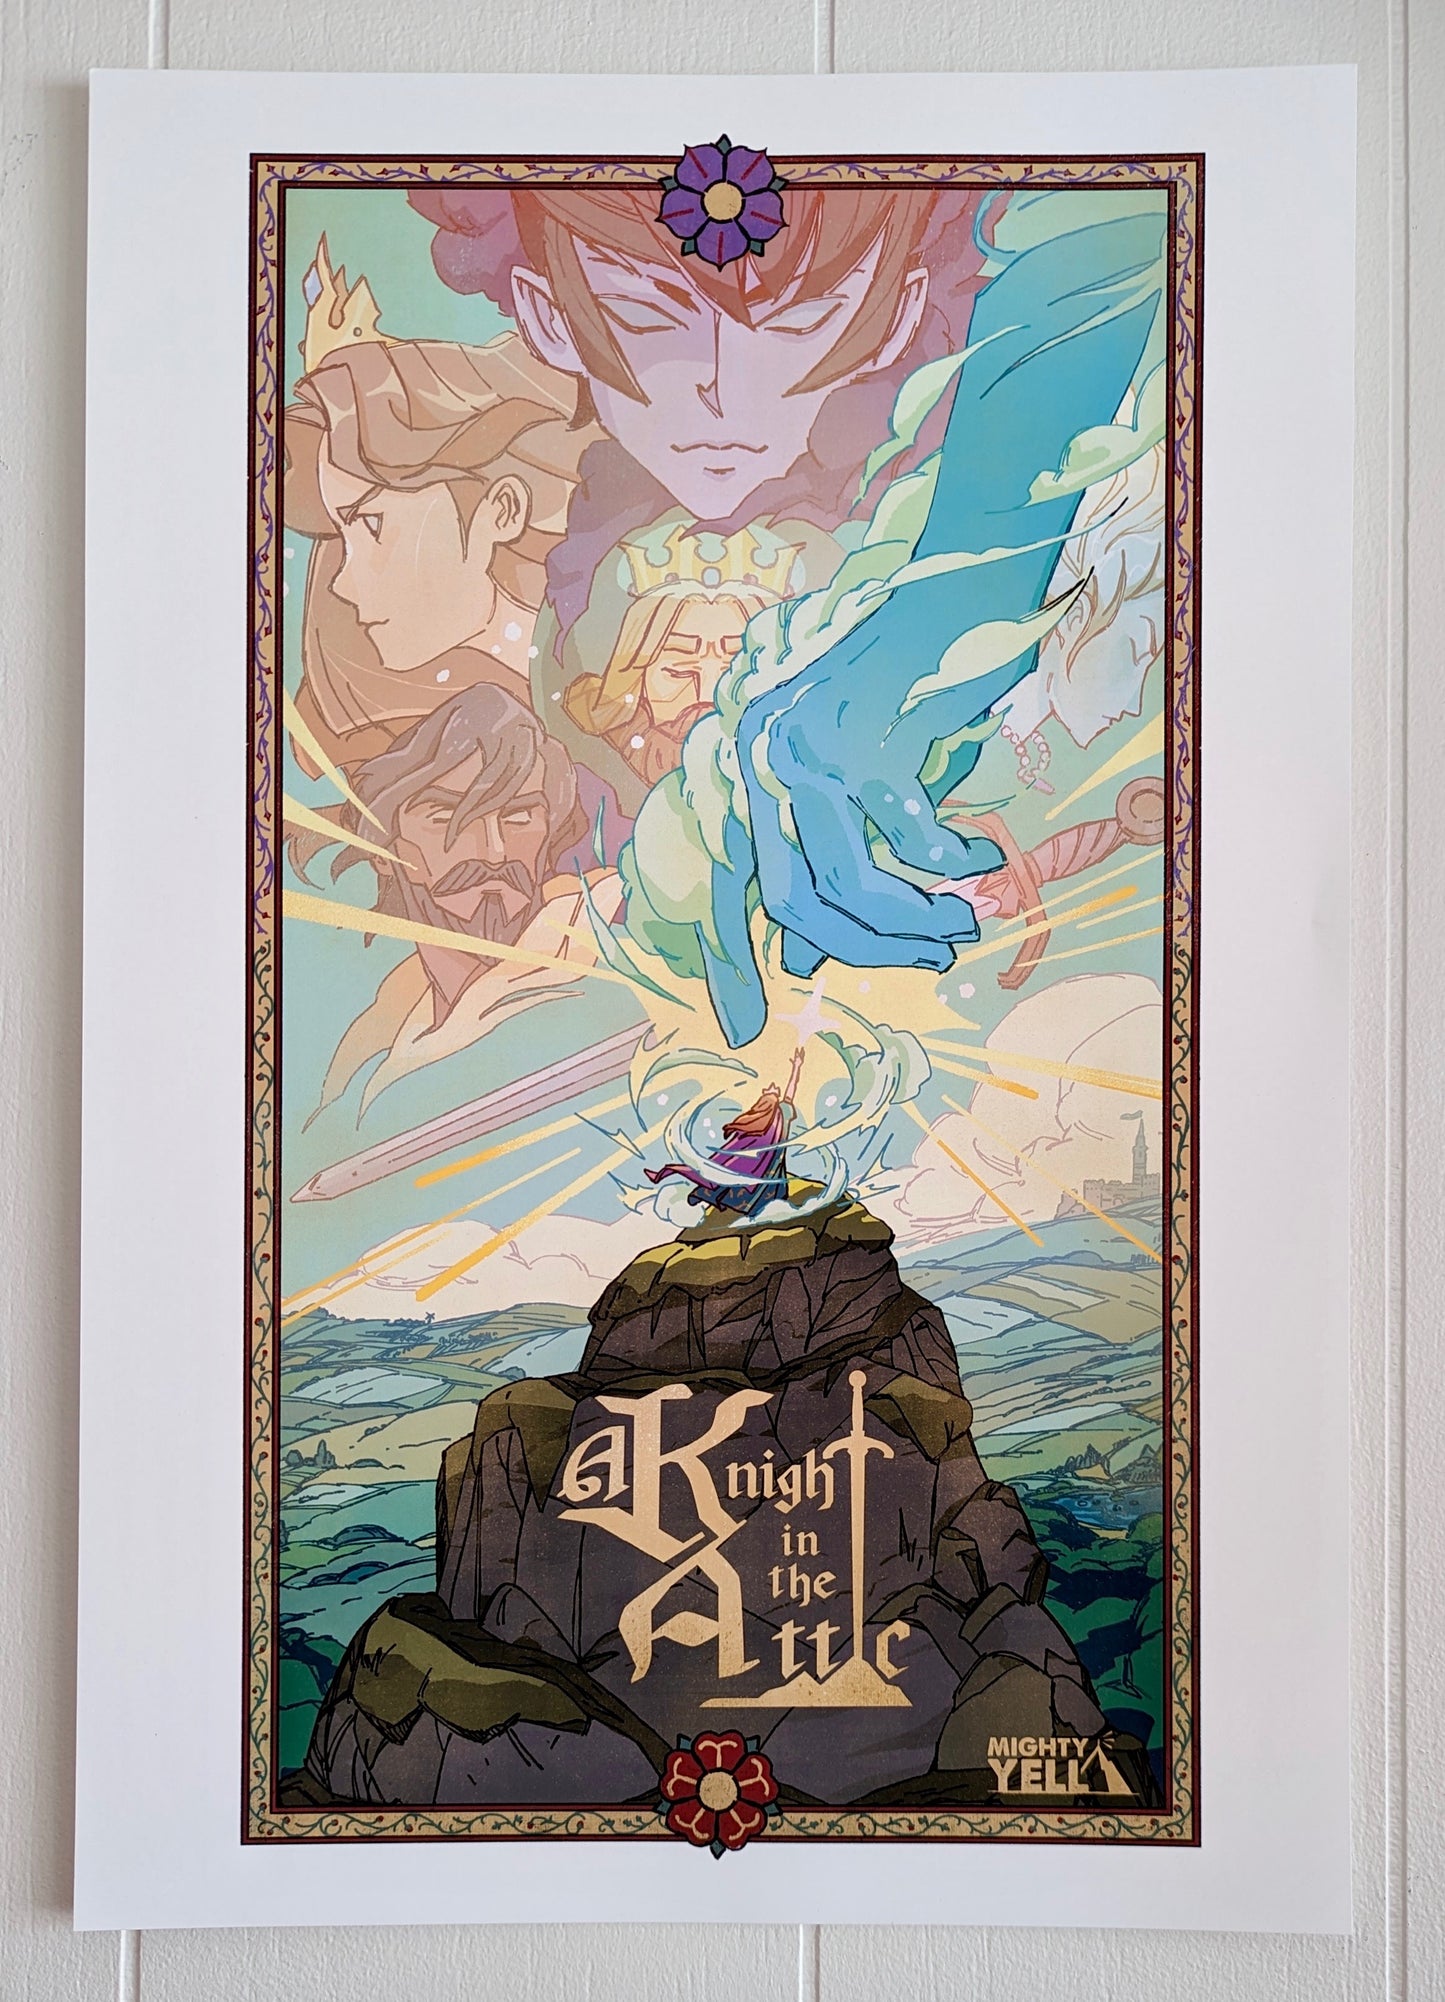 A Poster with Key Art from the game A Knight In The Attic. Featuring Characters faces and a mountain landscape in soft and vibrant blue, yellow, green, brown and peach. A character stands atop a mountain, in front of a large blue hand and a sword. In medieval style font it reads “A Knight In The Attic” and the “I” in attic is a sword. The “Mighty Yell Logo in the bottom right corner. The border is yellow with purple and burgundy flowers and green vines.